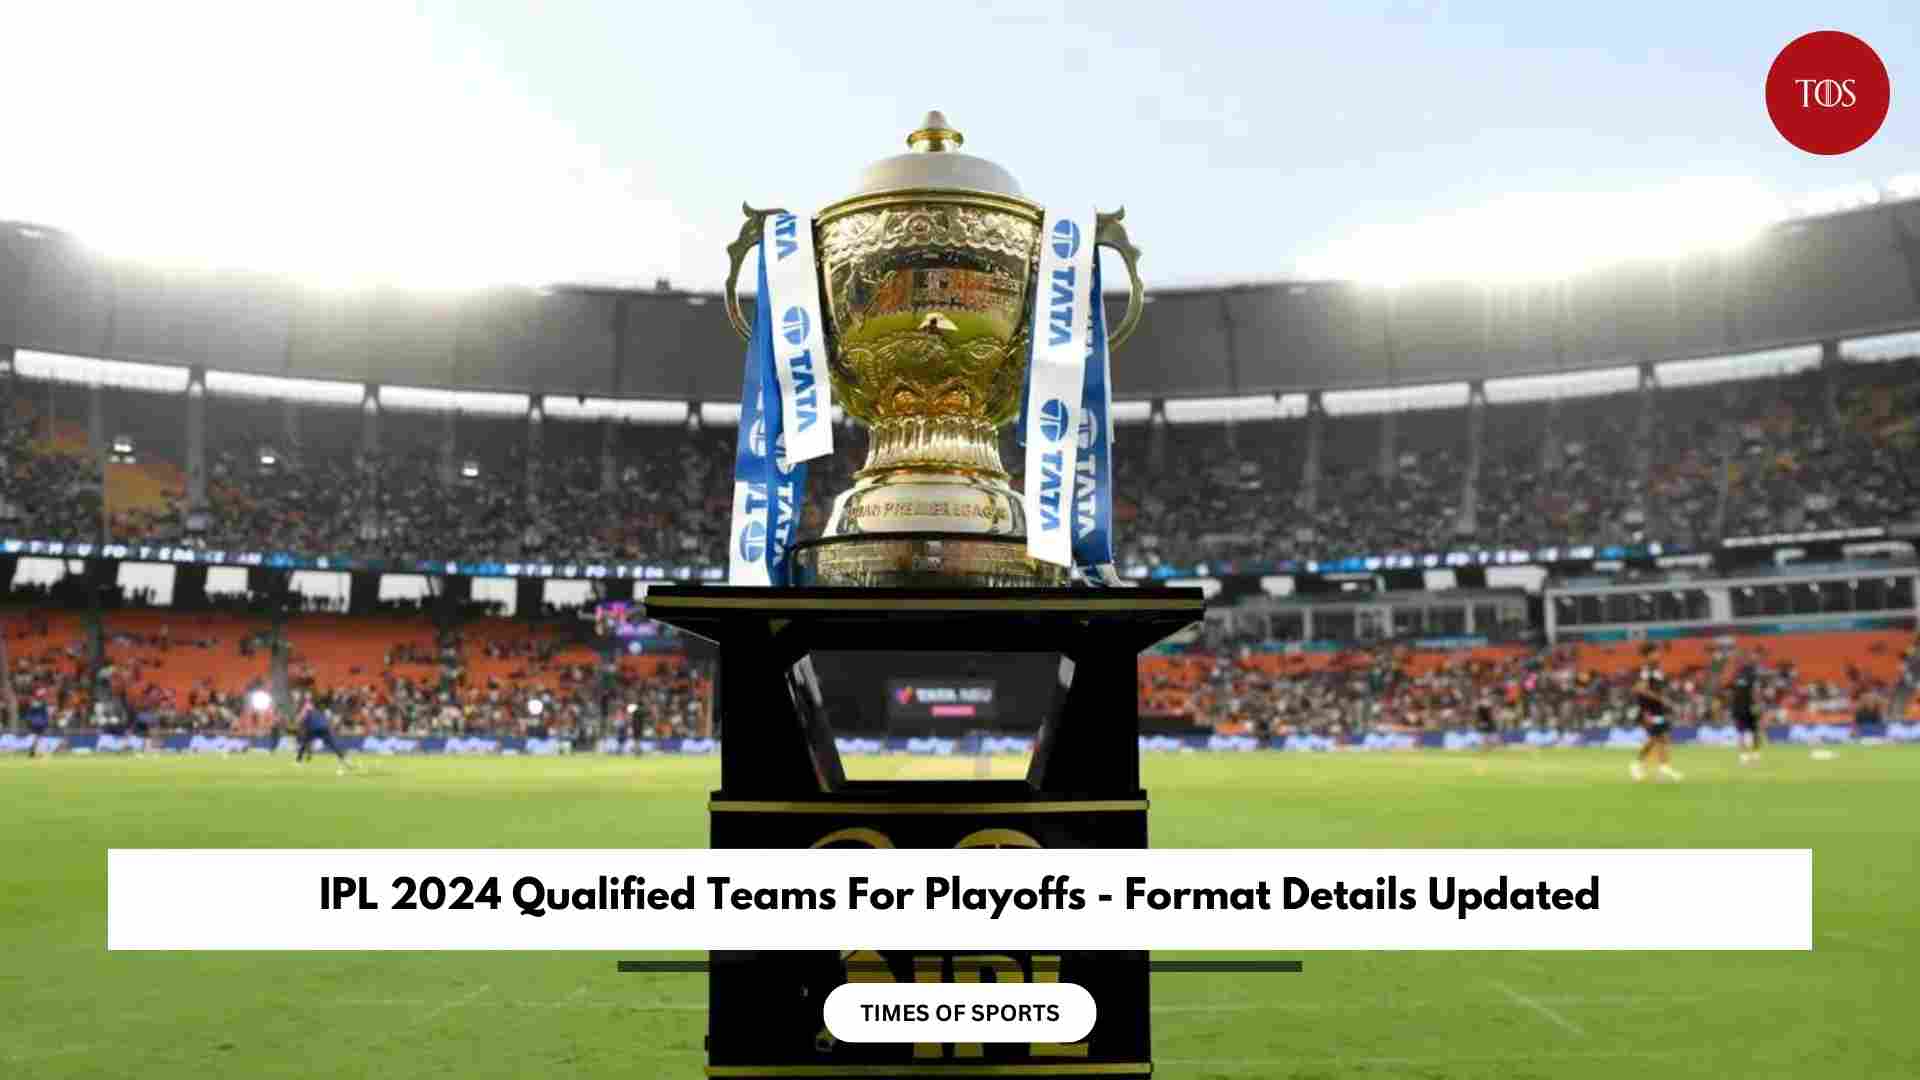 IPL 2024 Qualified Teams For Playoffs Format Details Updated